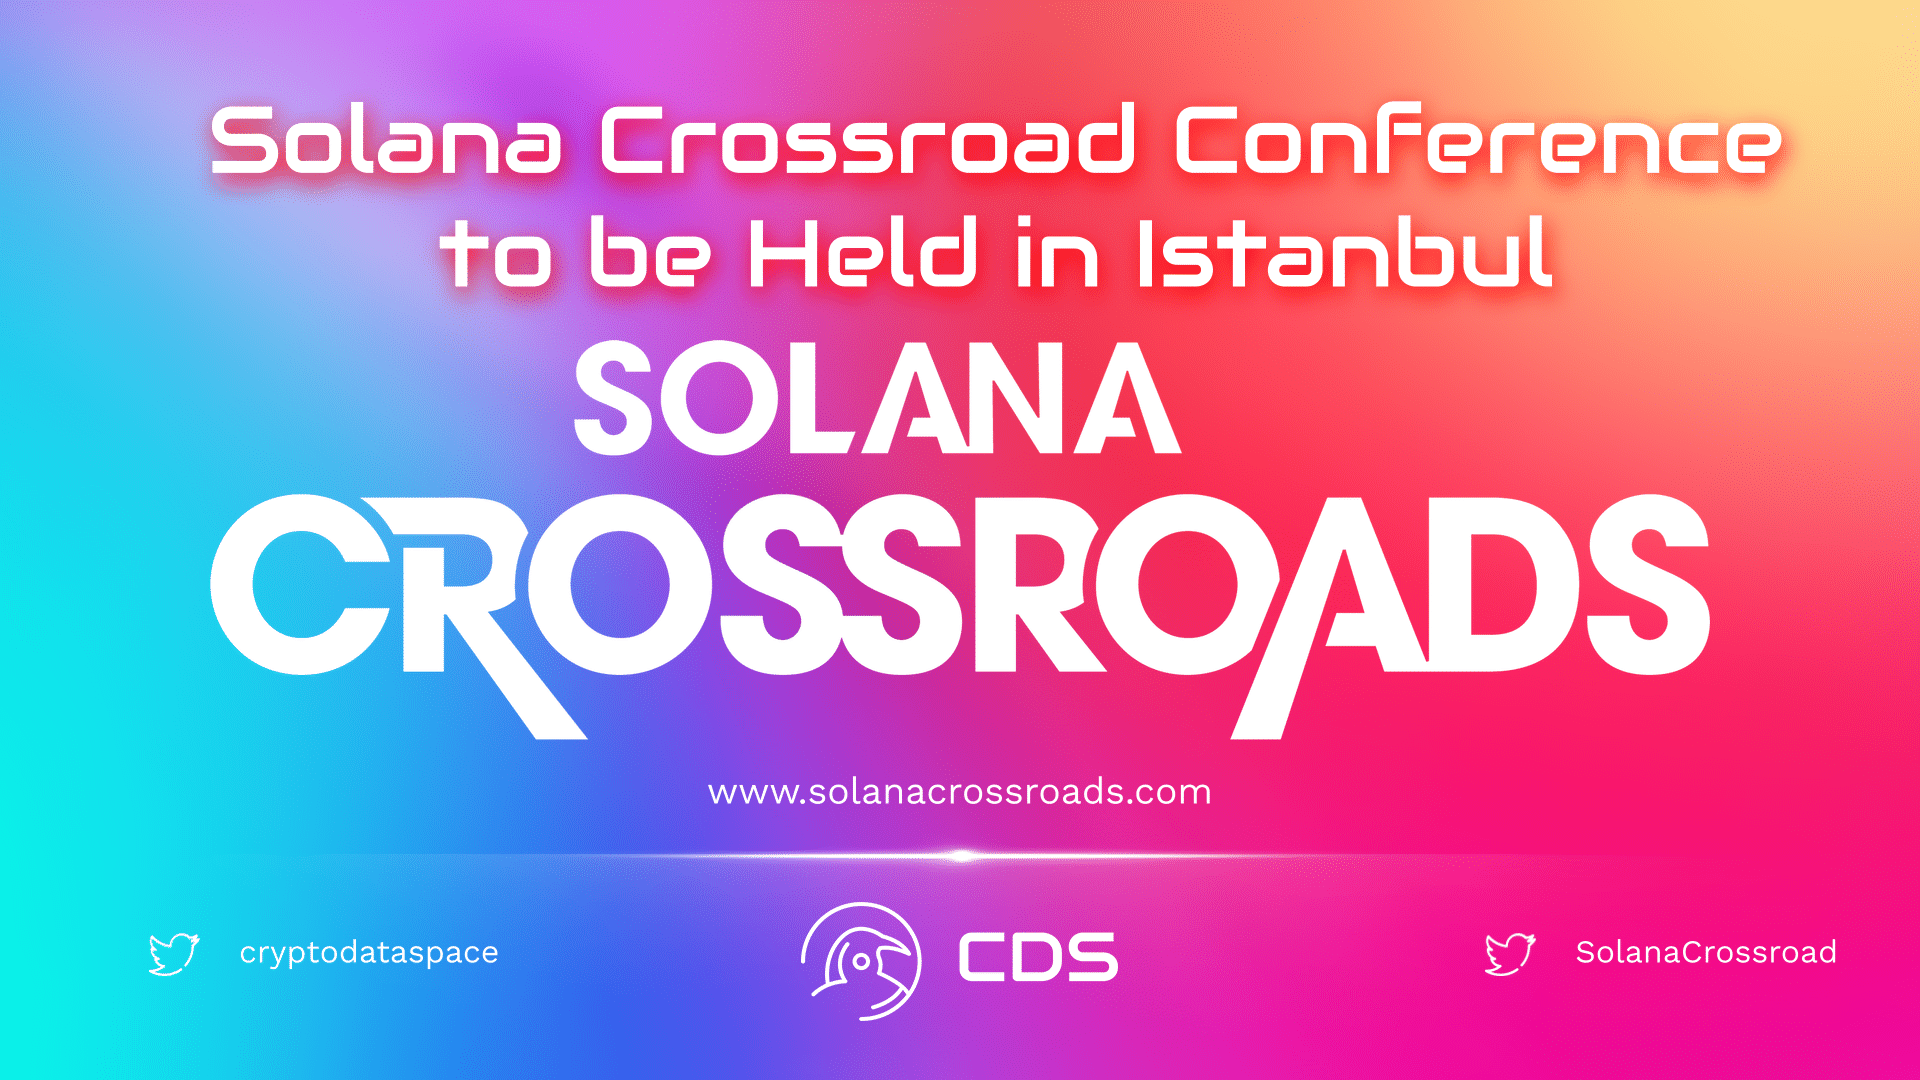 Solana Crossroad Conference to be Held in Istanbul